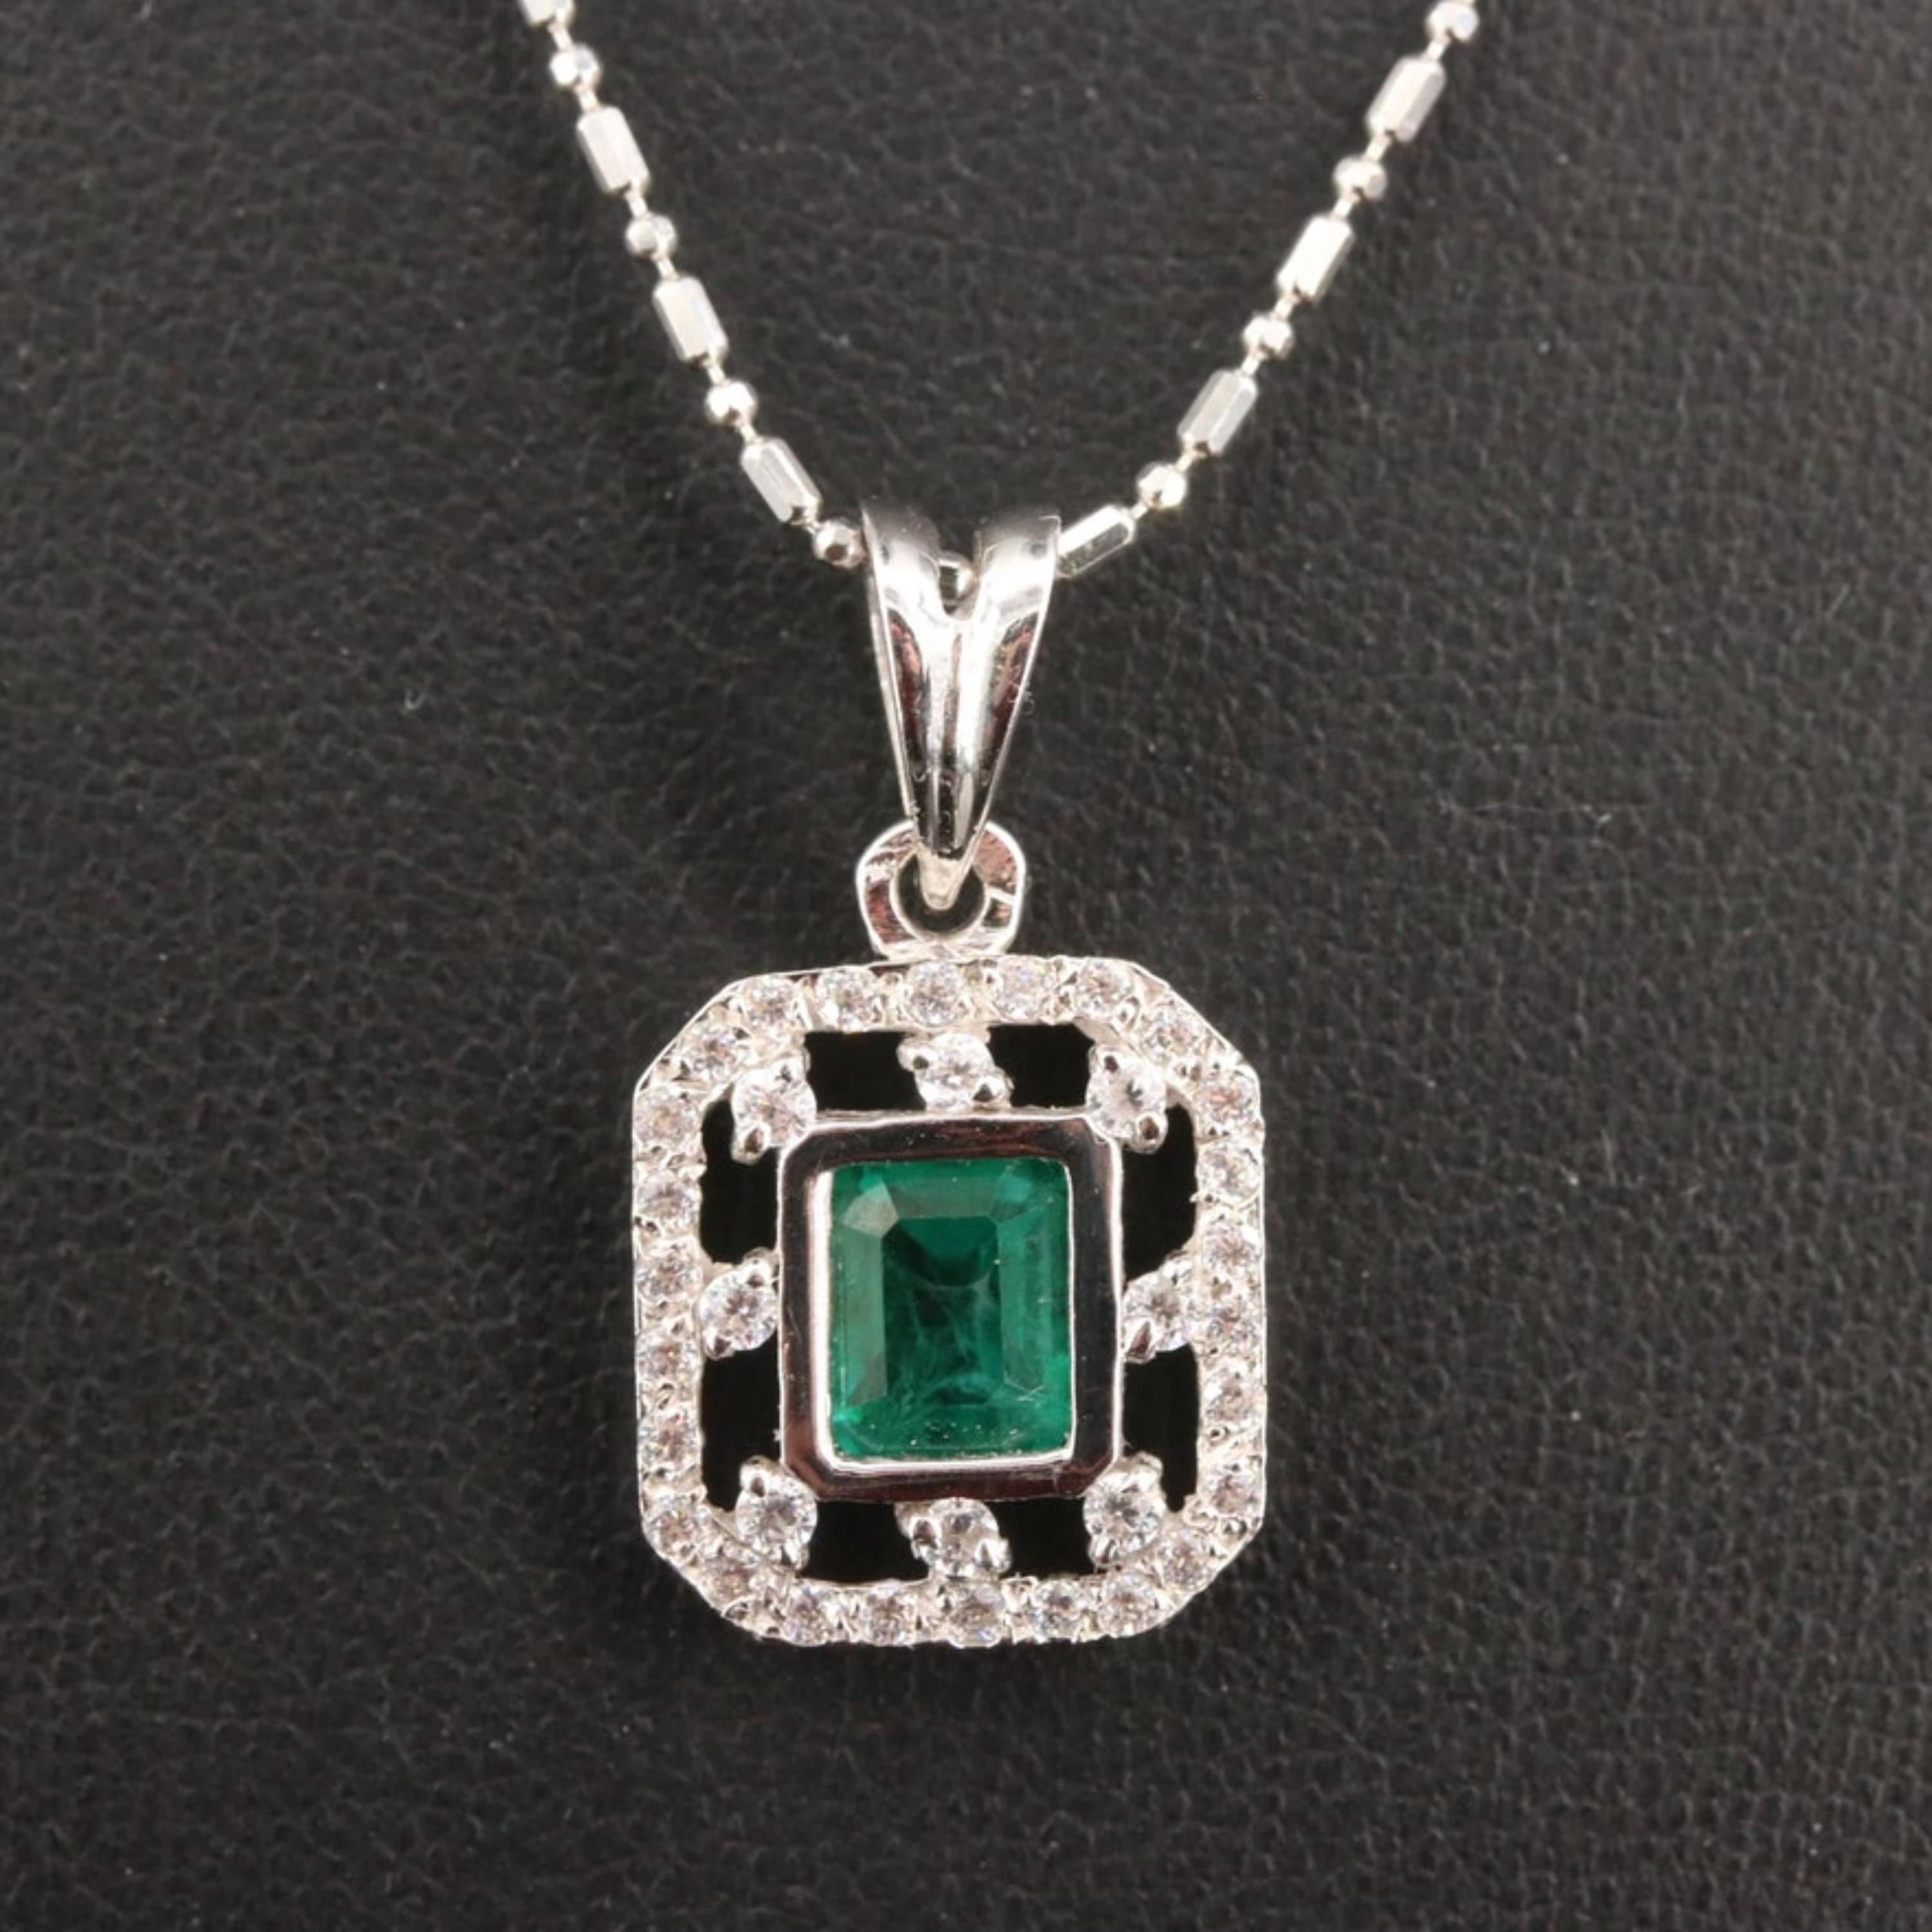 Vintage Emerald Diamonds Bridal Pendant Necklace, Natural Emerald Diamond Bridal Pendant Necklace, - Bridal Diamond Necklace
 
 Item Description
 → Handmade, Made to order
 → Material: SOLID 18K/18K GOLD
 
 Stone Details:
 
 Primary Stone(s) Type: